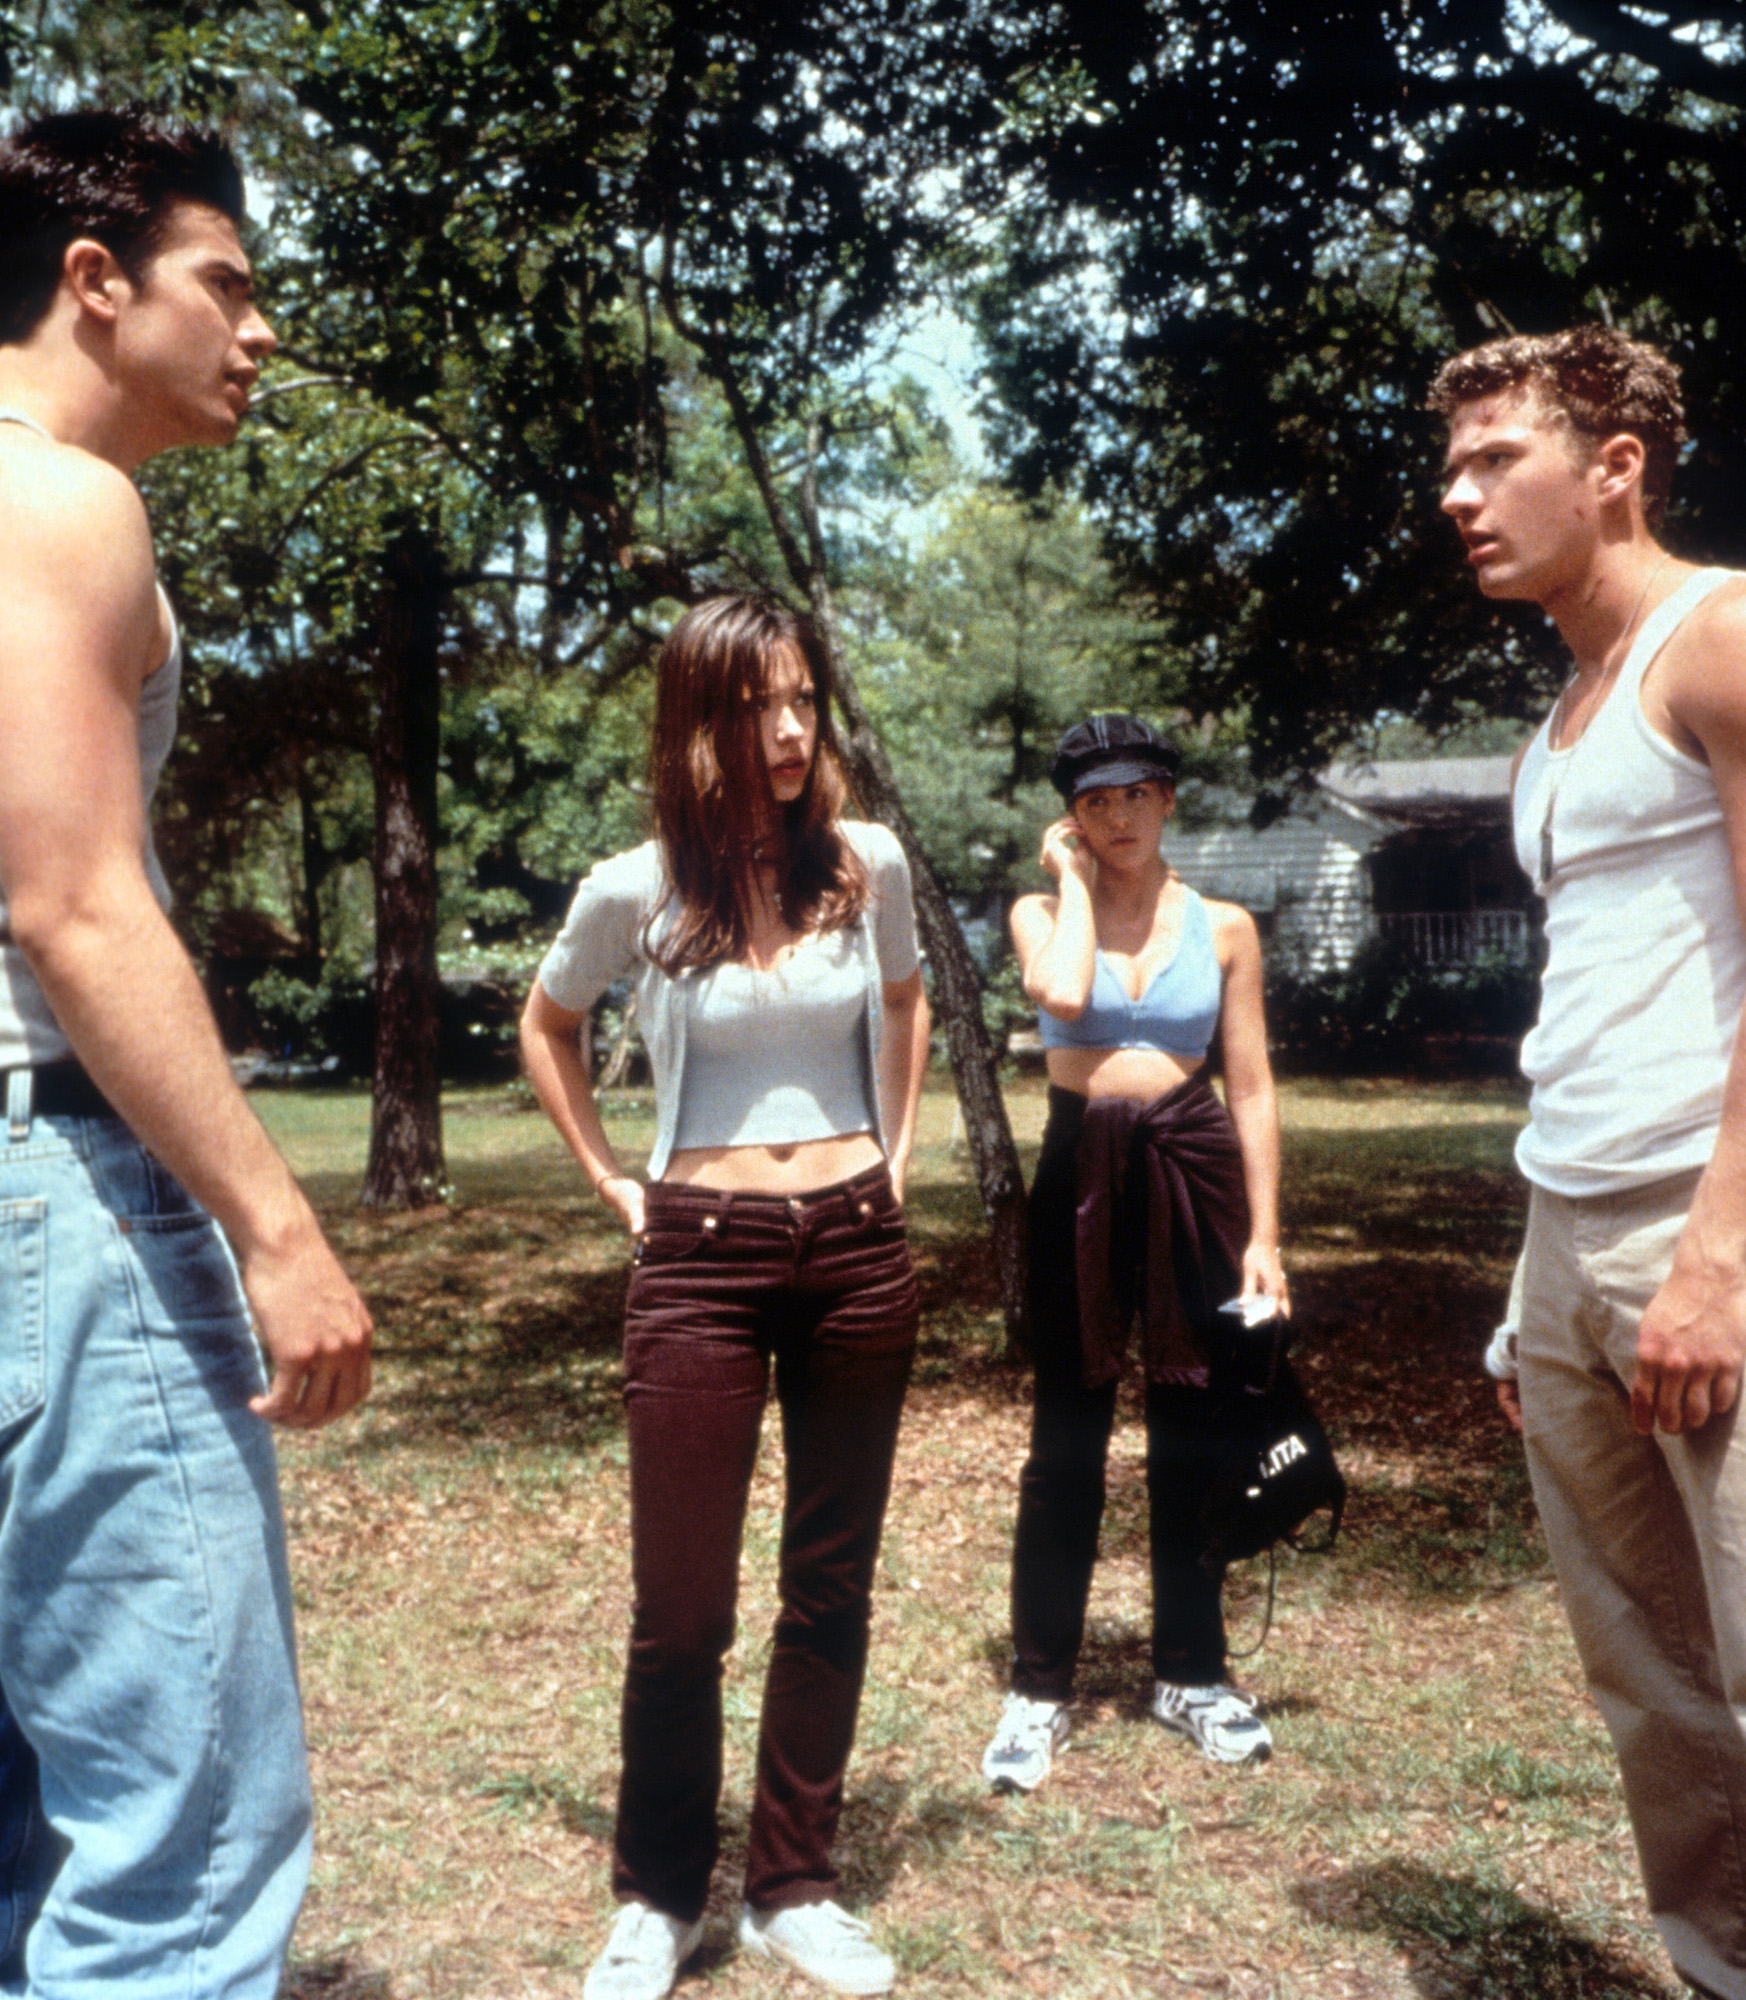 Freddie Prinze Jr having a confrontation Ryan Phillippe's character as Jennifer Love Hewitt and Sarah Michelle Gellar watches on in 'I Know What You Did Last Summer', 1997 